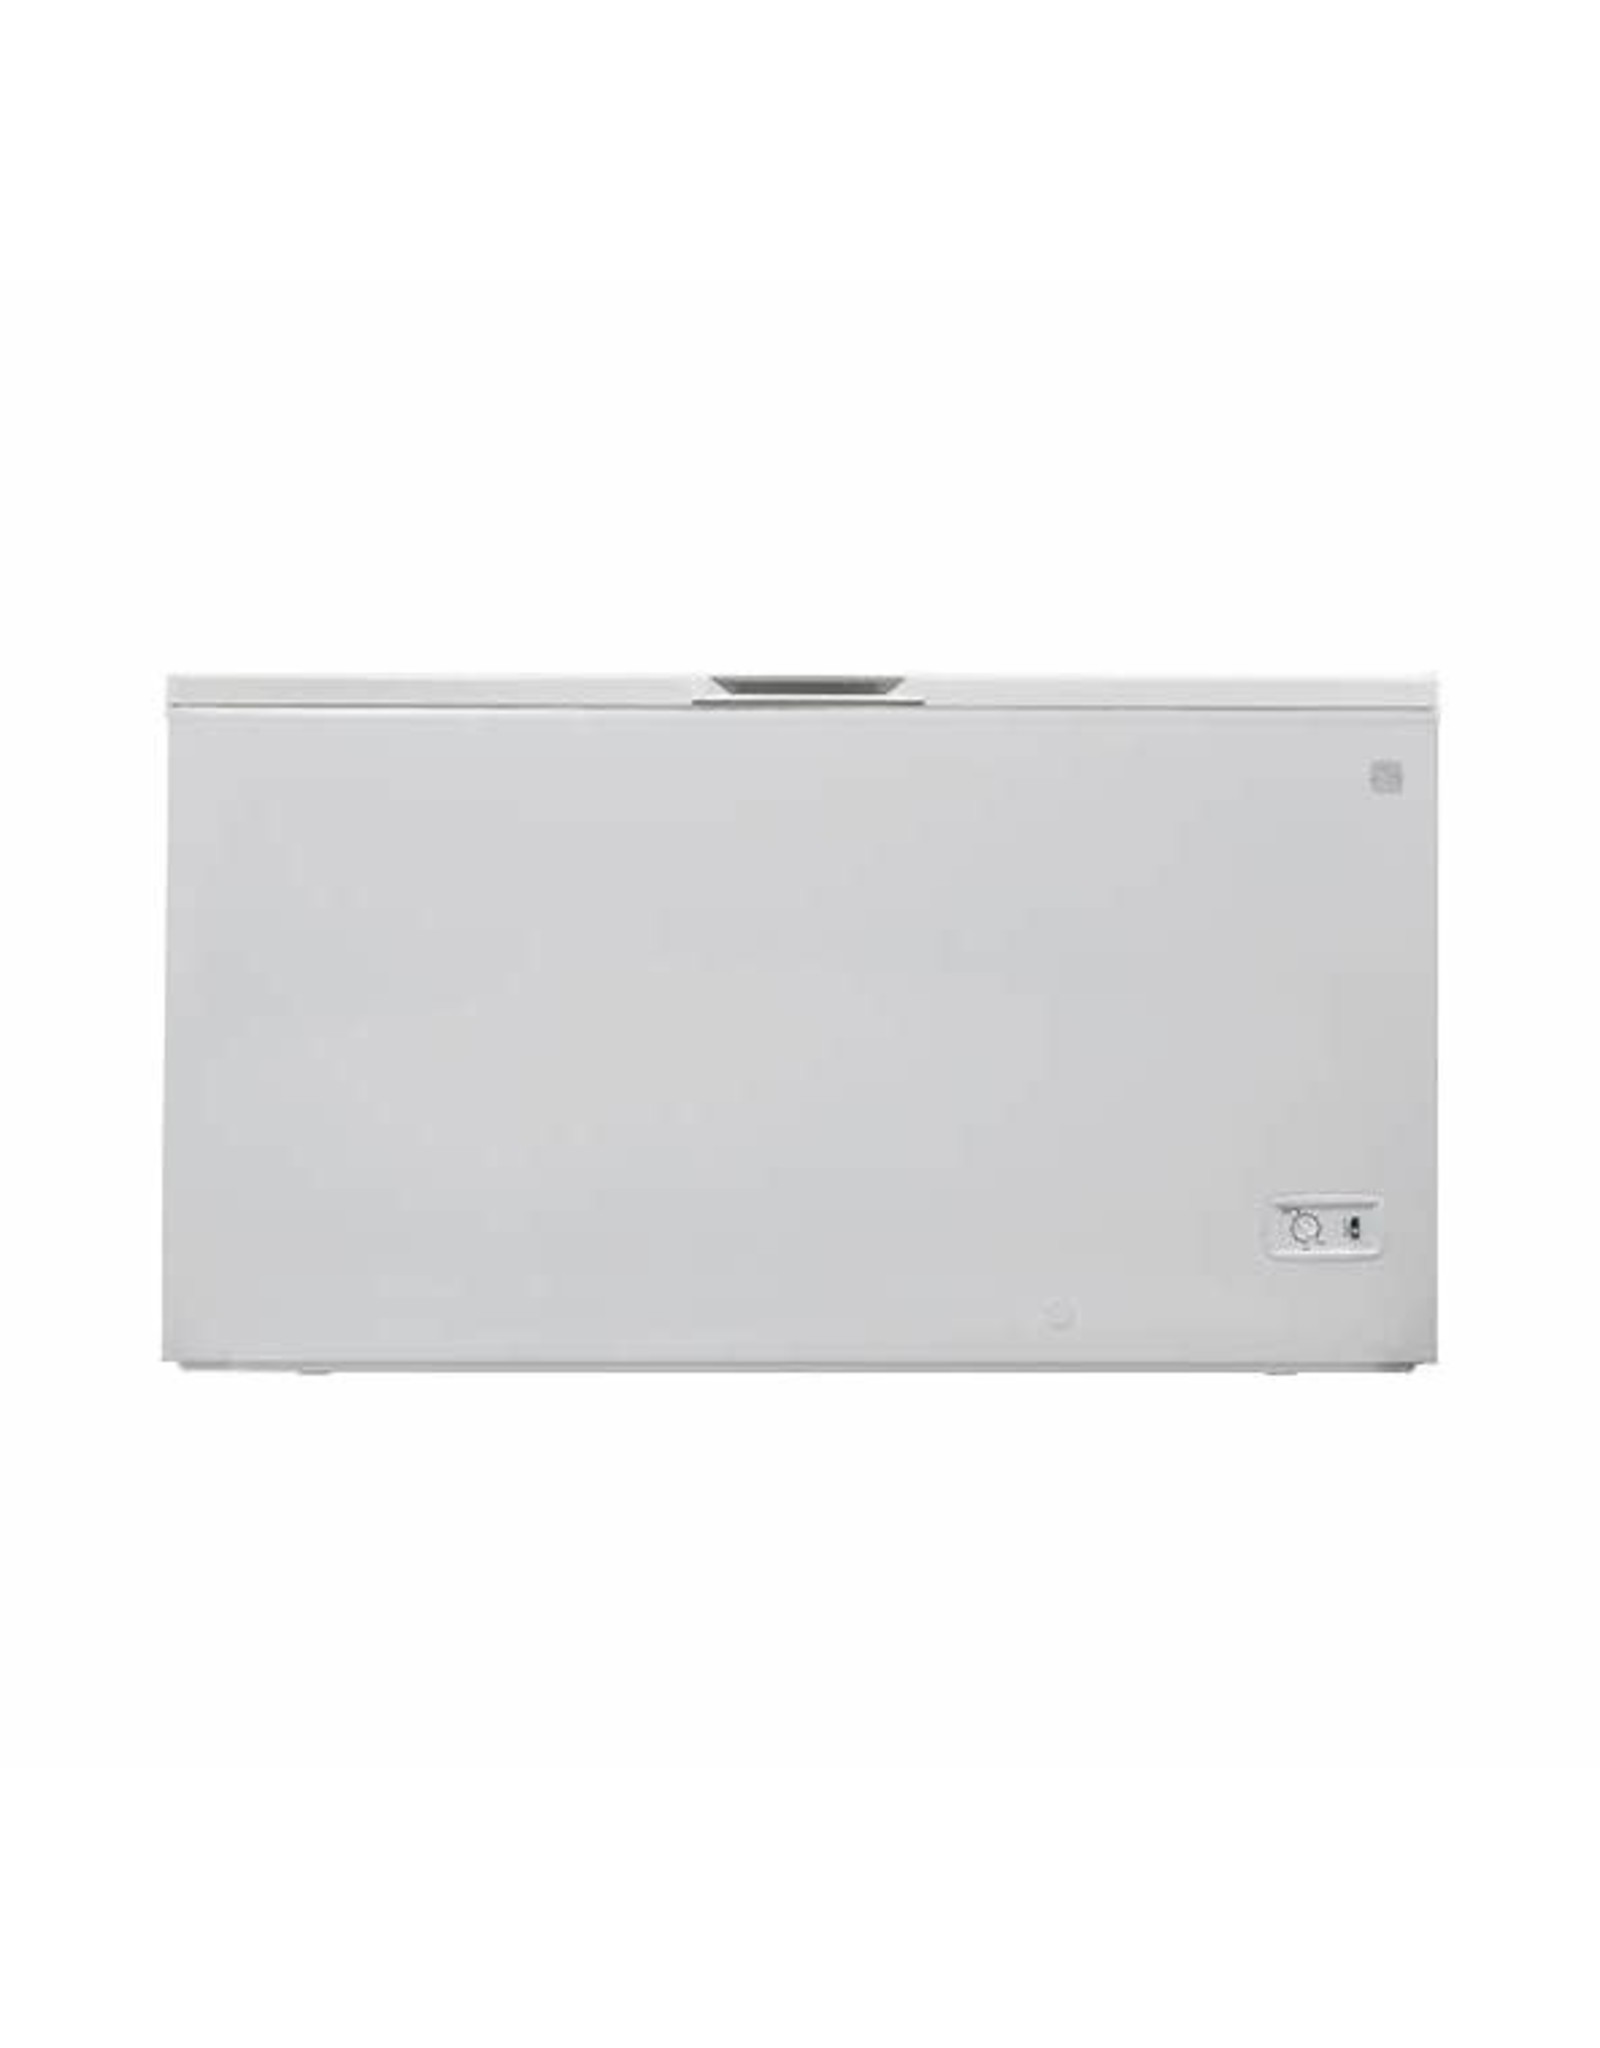 KENMORE KLFC015MWD Kenmore 14.8-cu ft Manual Defrost Chest Freezer (White)